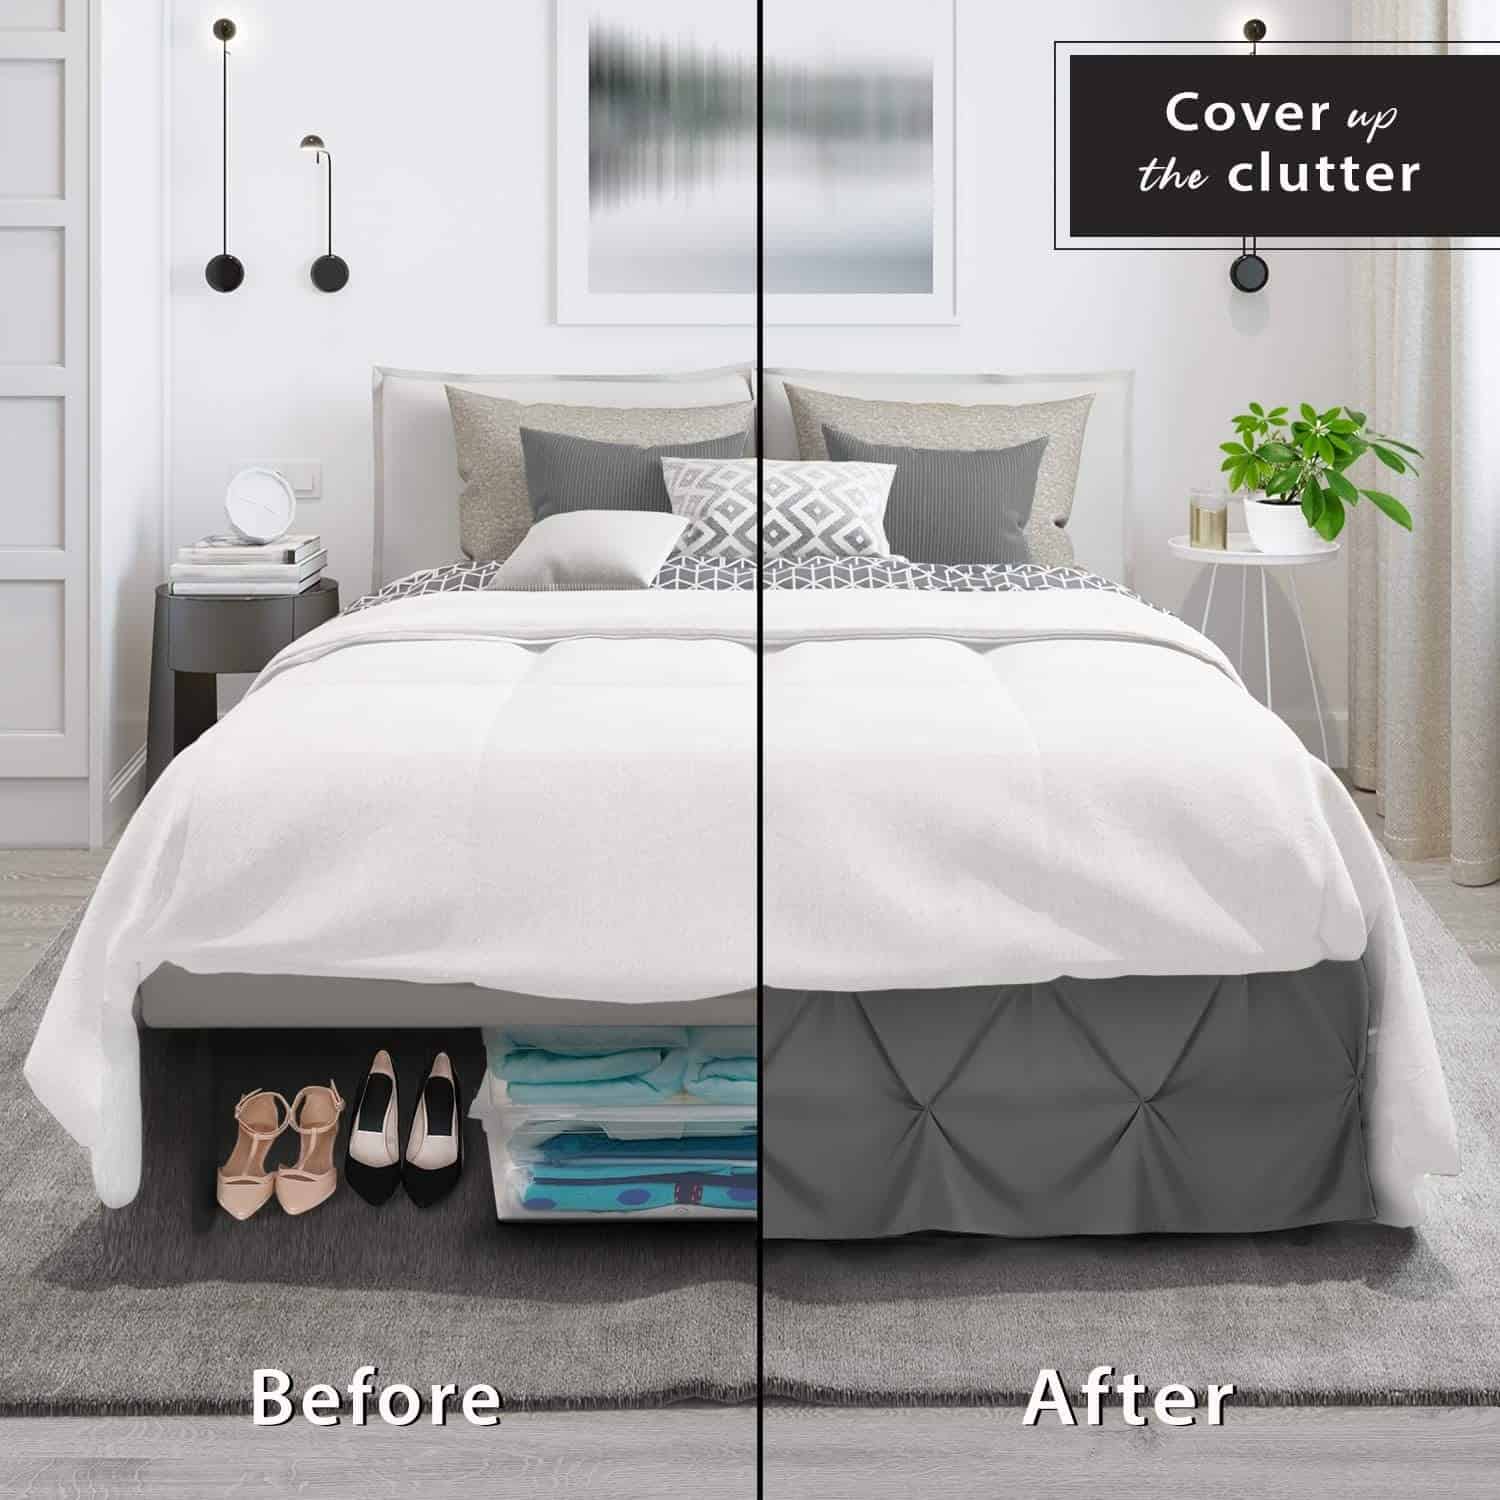 Benefits Of Putting On A Bed Skirt Without Removing The Mattress